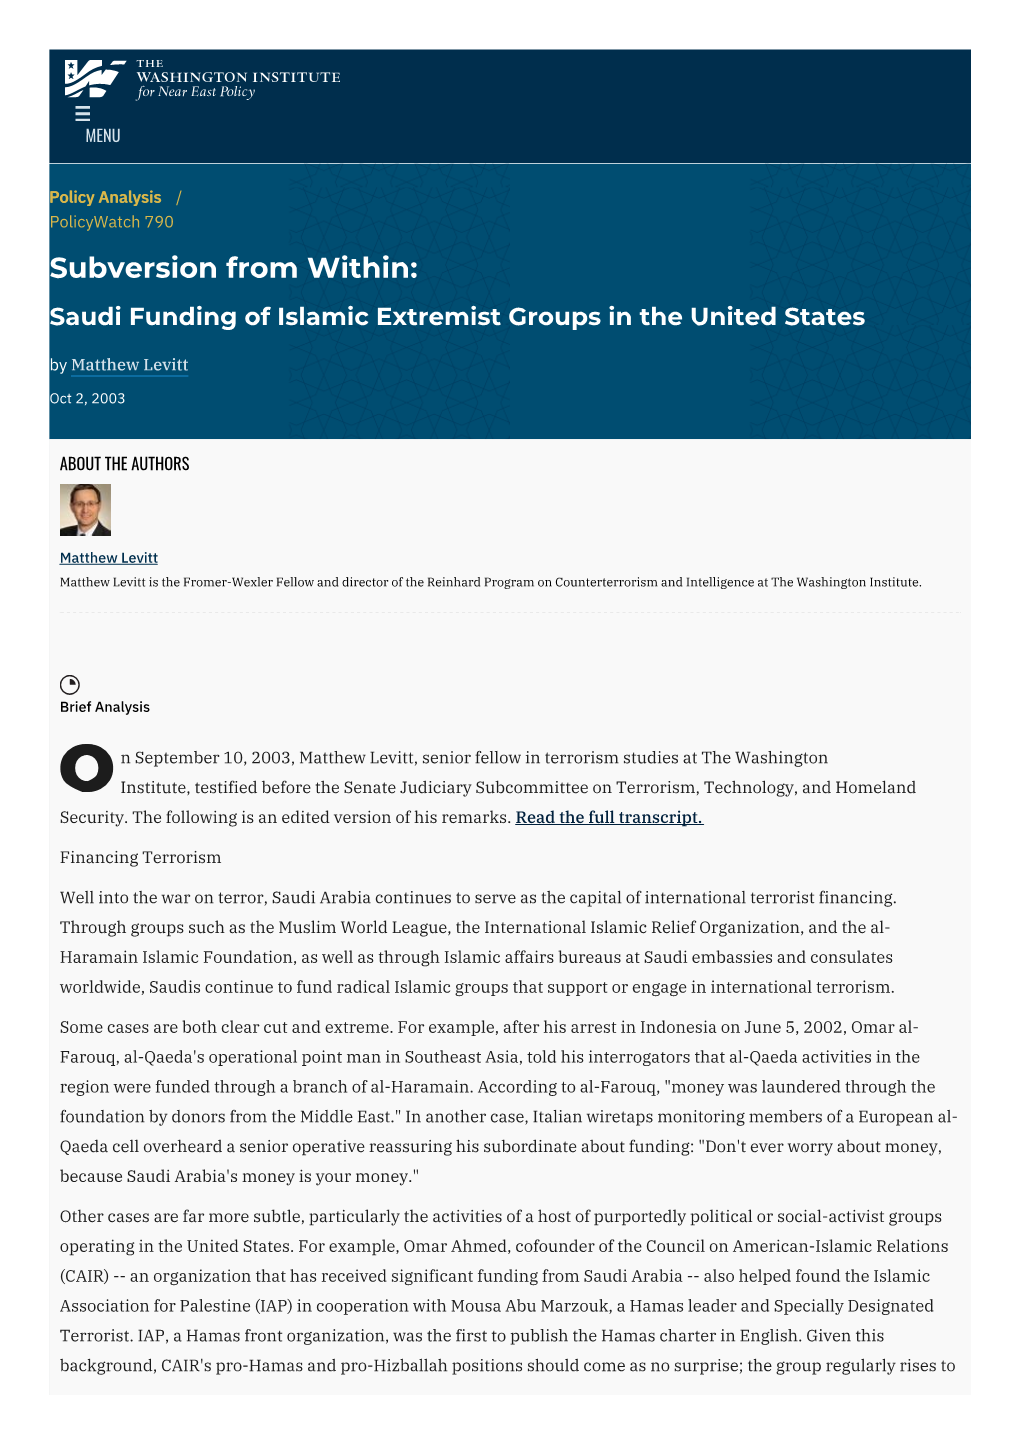 Saudi Funding of Islamic Extremist Groups in the United States by Matthew Levitt